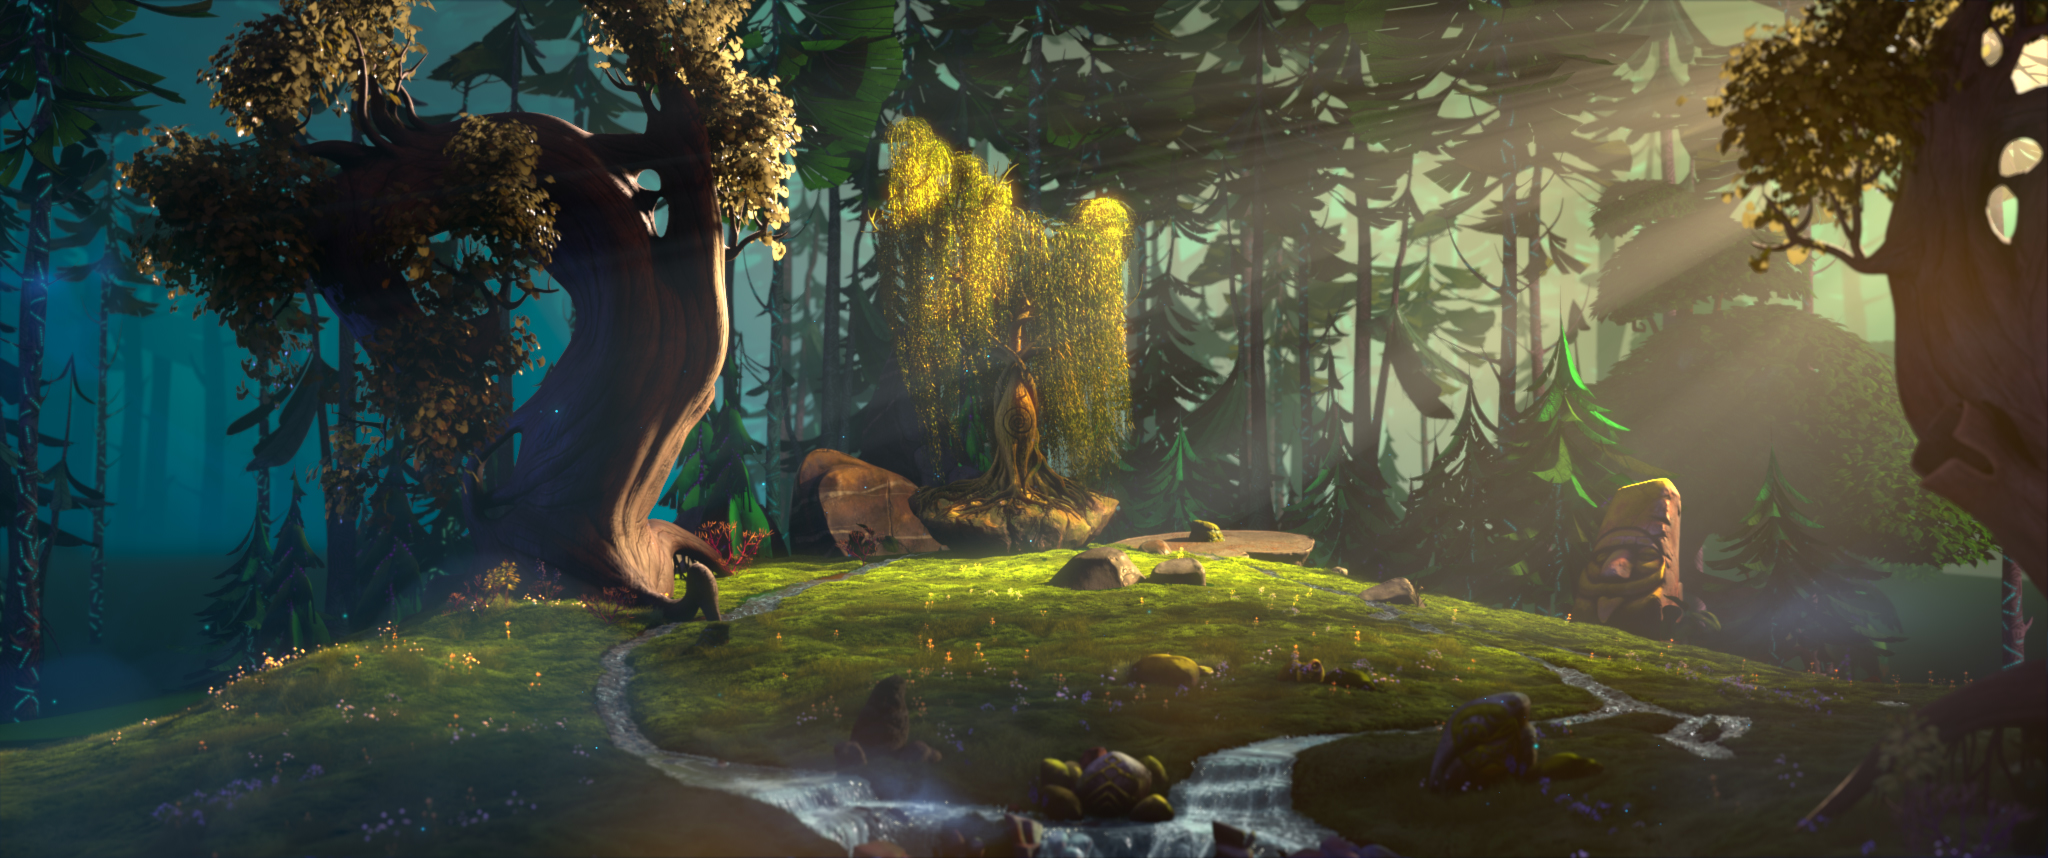 Mavka The Forest Song Picture - Image Abyss